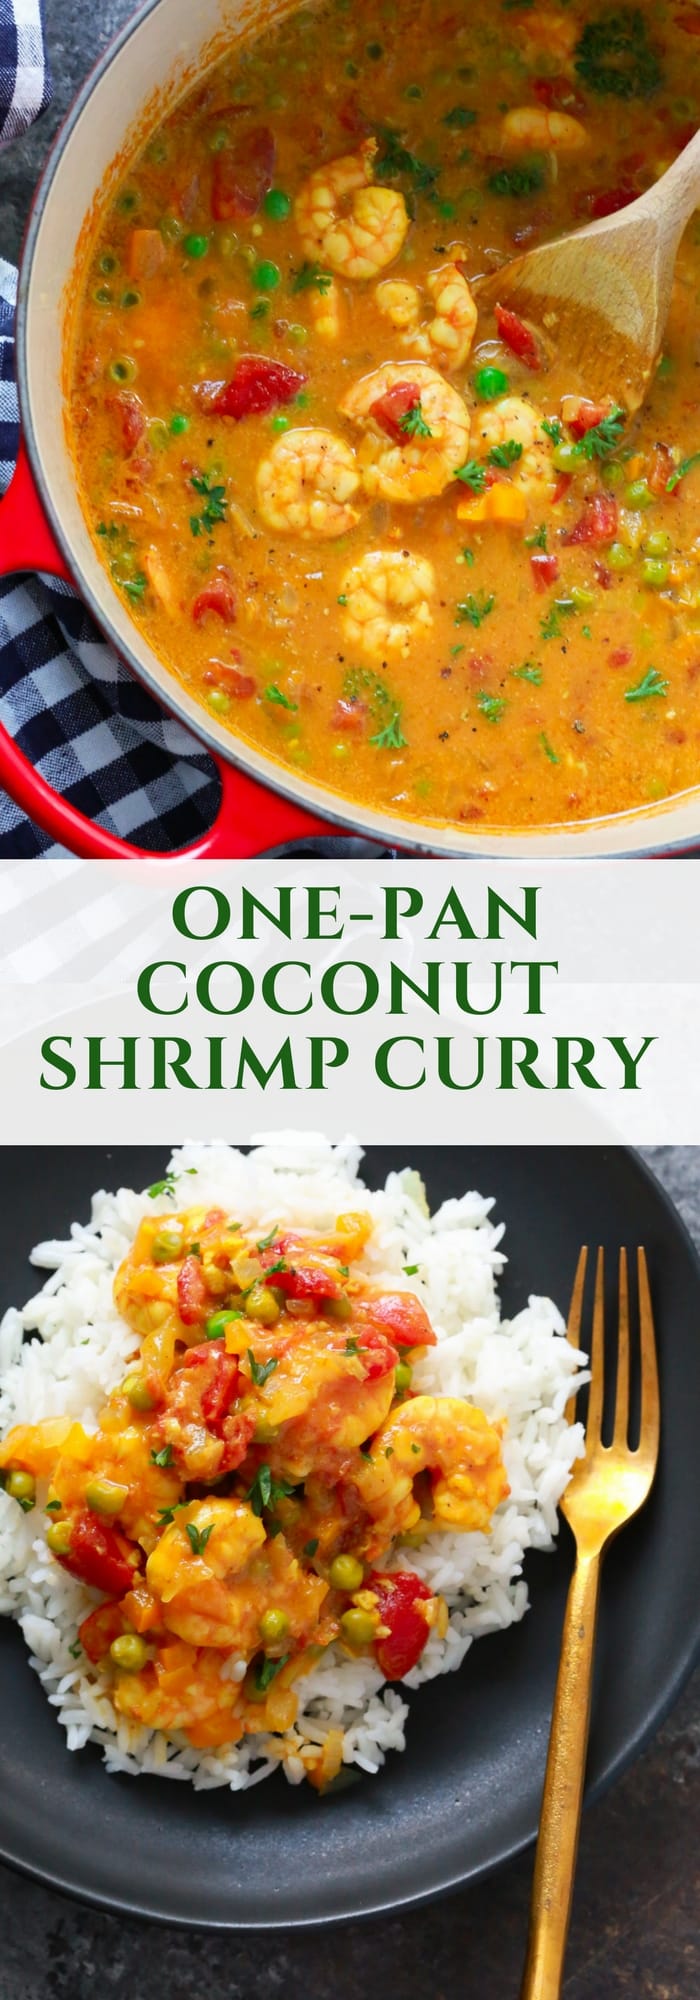  It’s time to enjoy comforting food with this easy and quick to make One-pan Coconut Shrimp Curry. It’s made with onions, tomatoes, coconut milk, curry and shrimp and it’s ready in less than 20 minutes. 